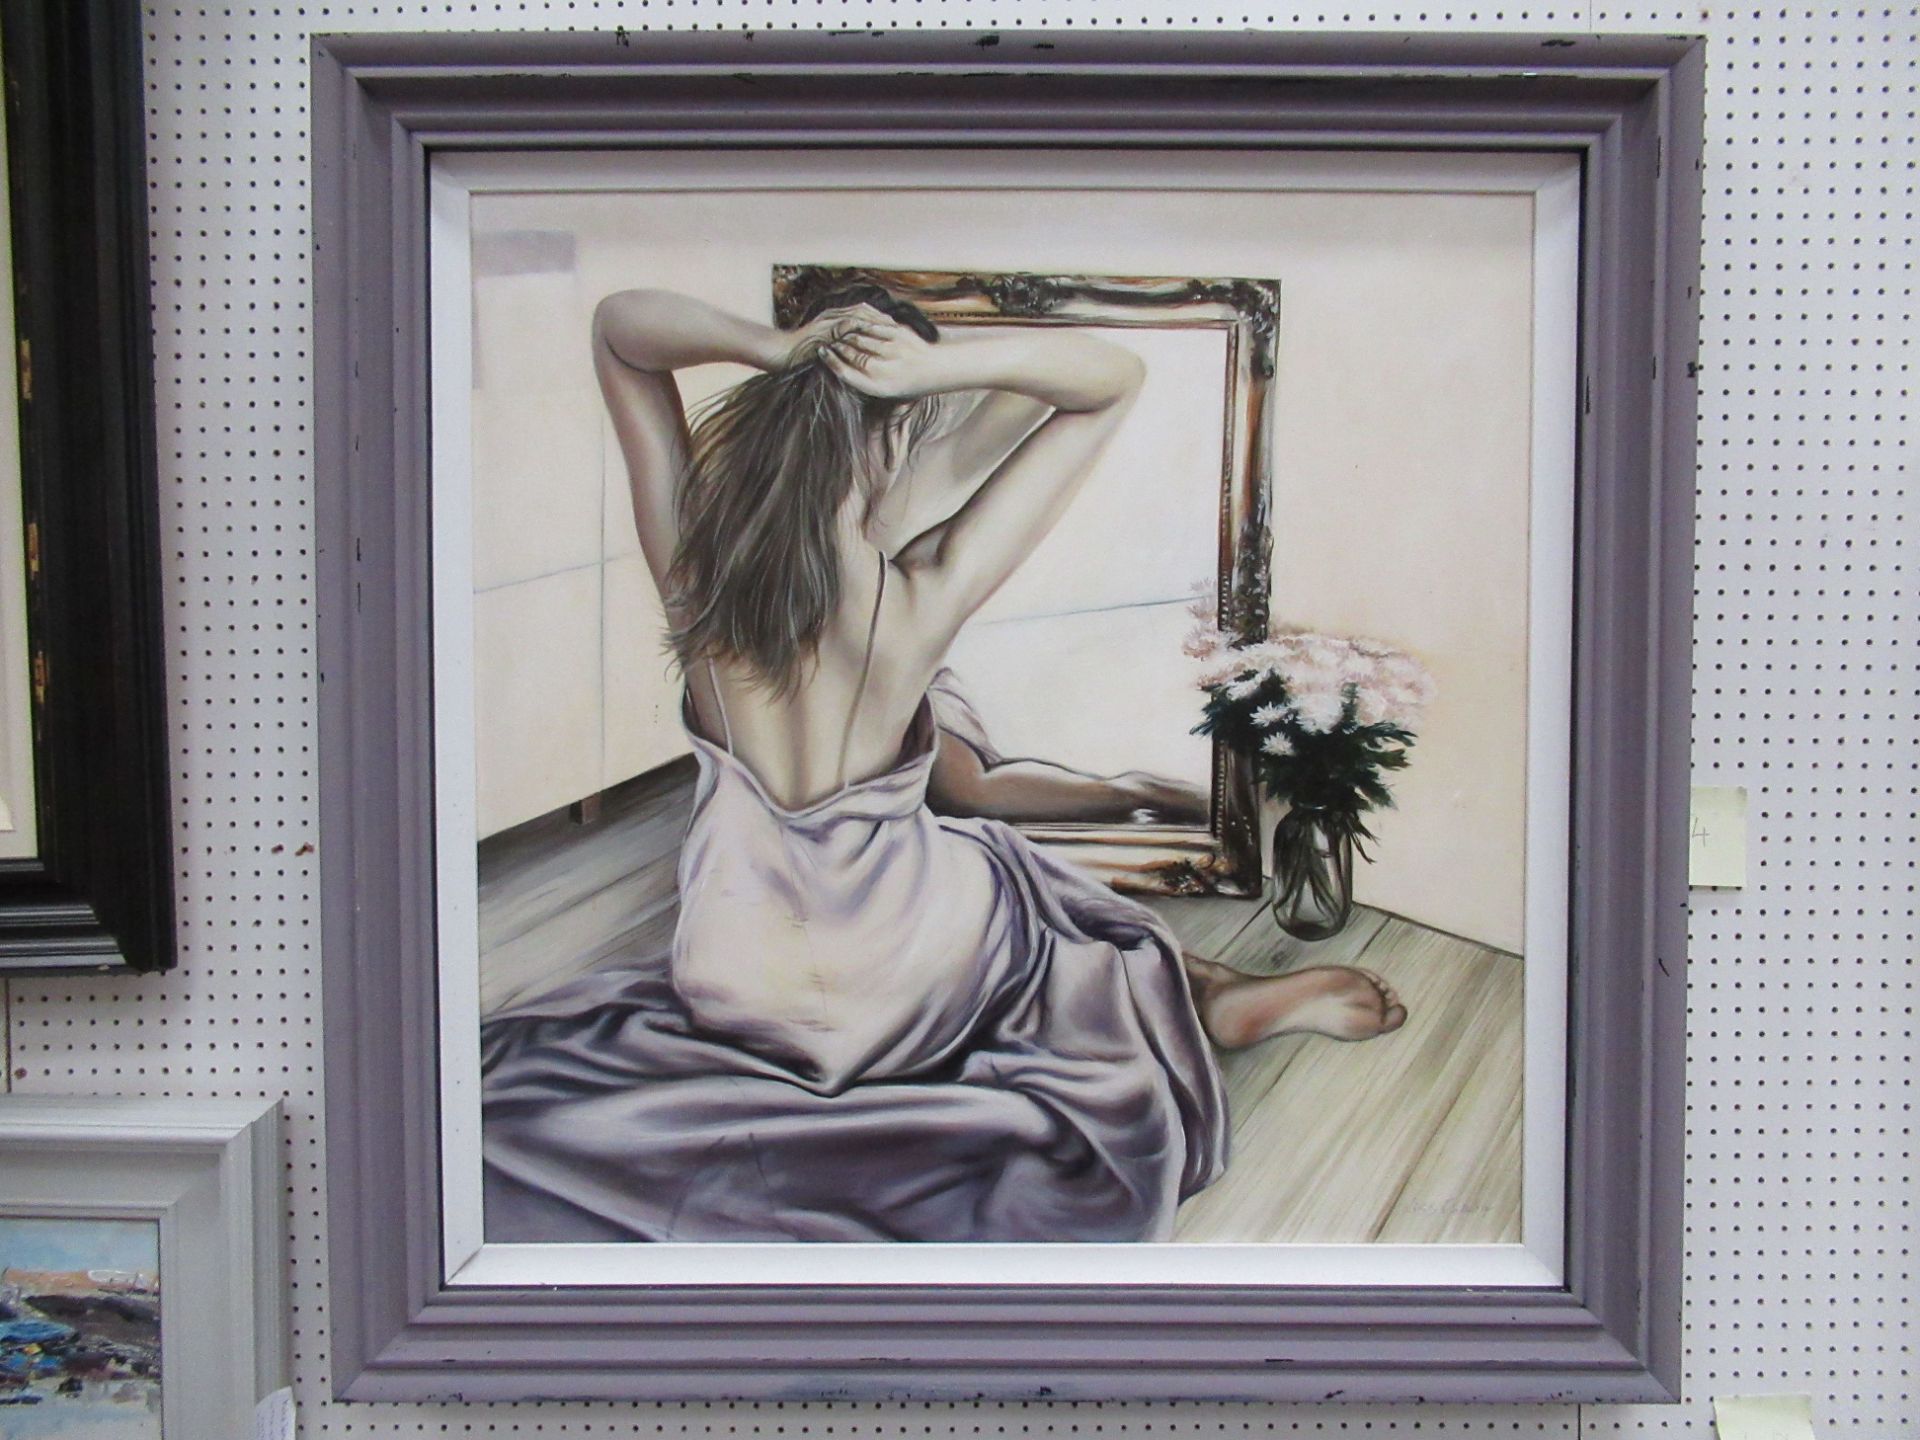 'Nude with Mirror' Oil Painting by Kiss, RRP £1,500. (39" x 39" including frame) - Image 2 of 3